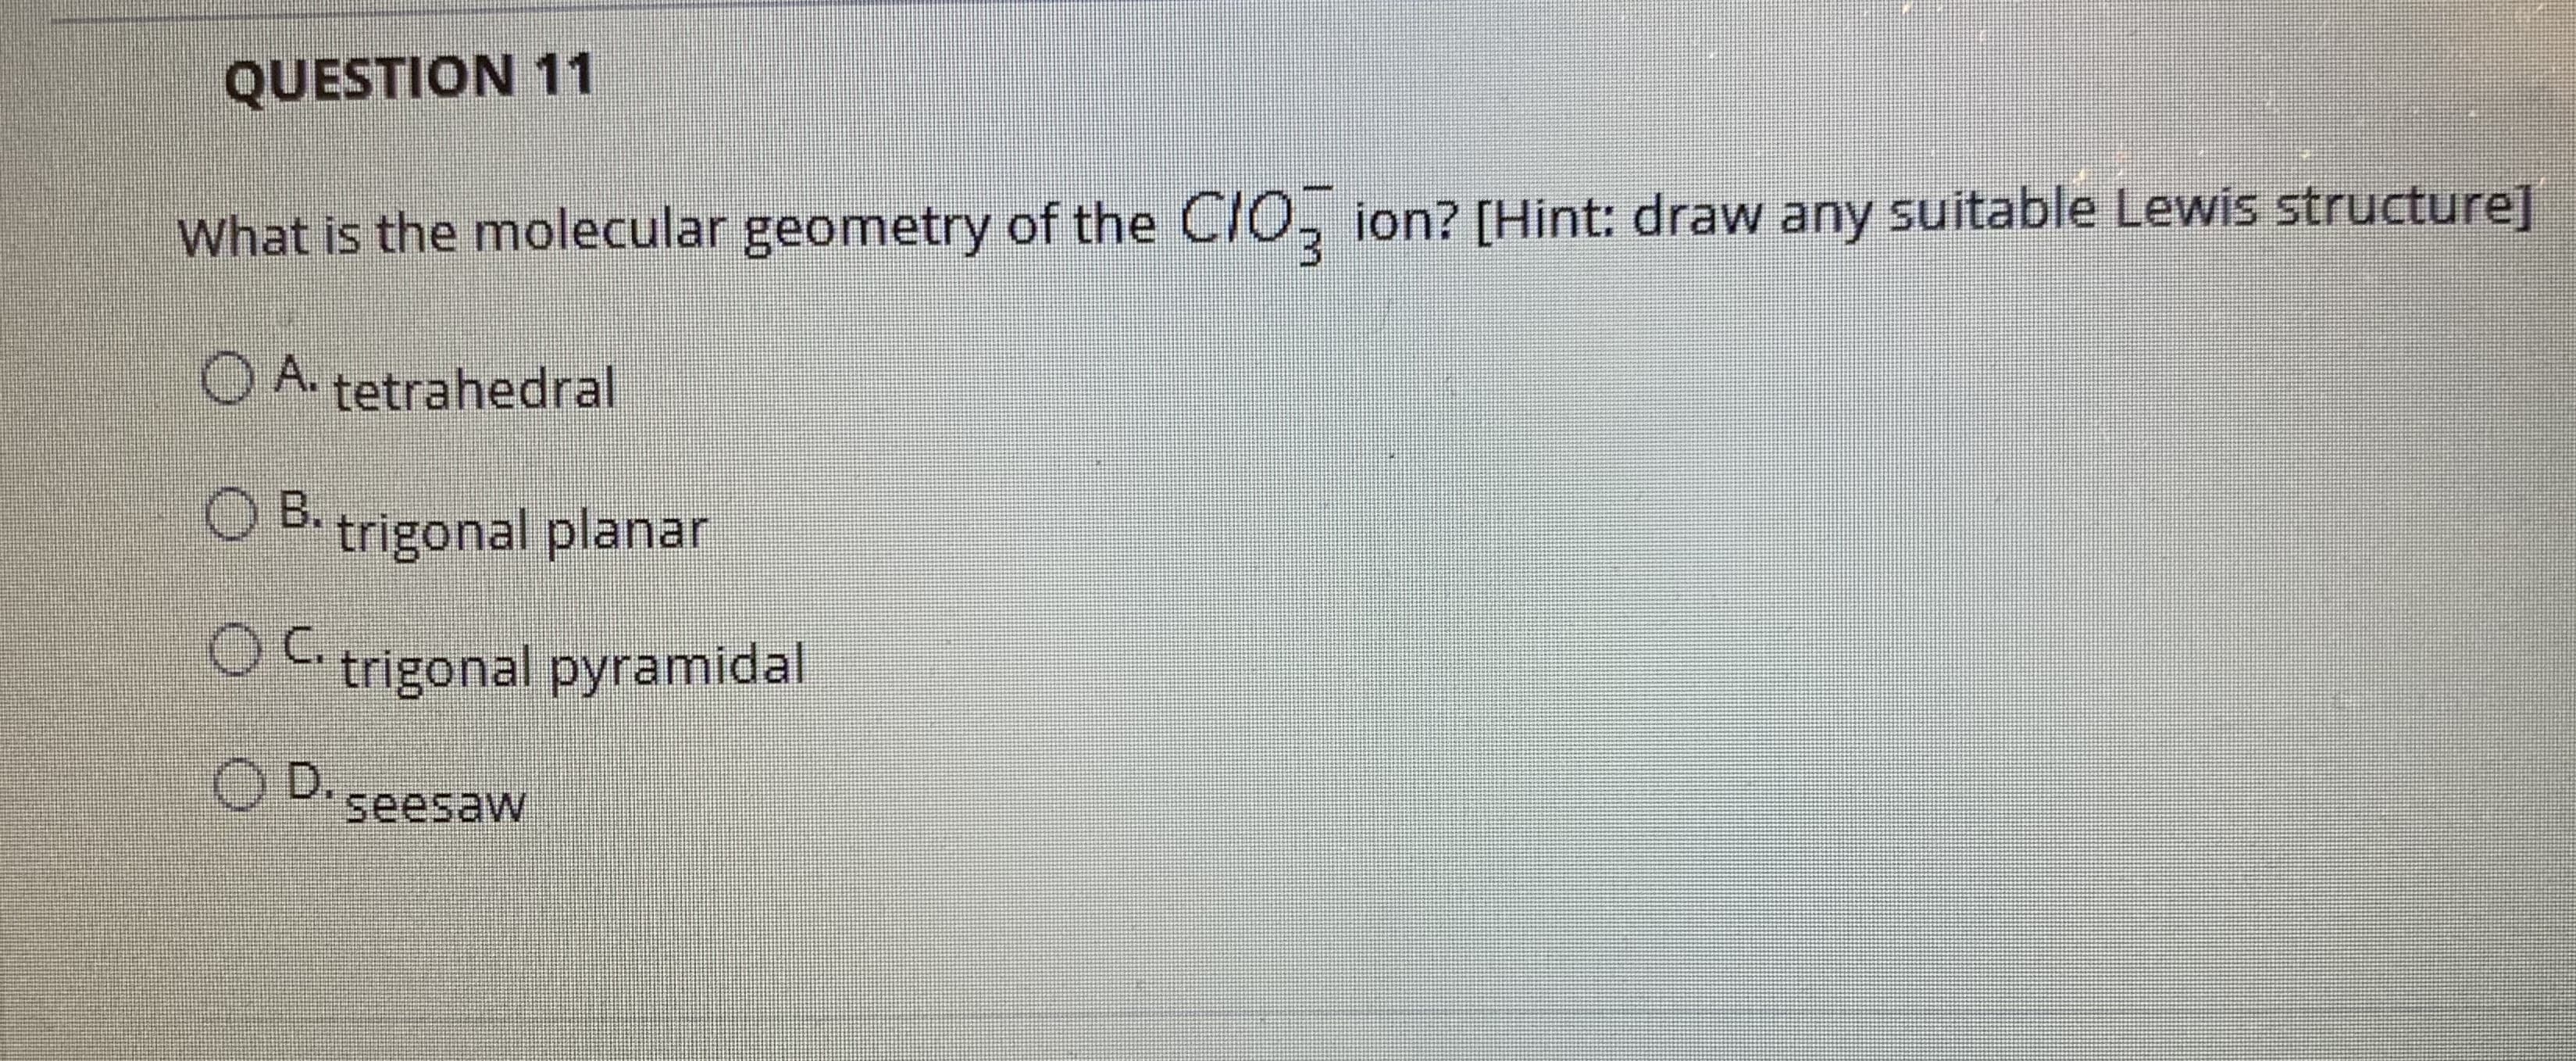 What is the molecular geometry of the CIO, ion? [Hint: draw any suitable Lewis structure]
